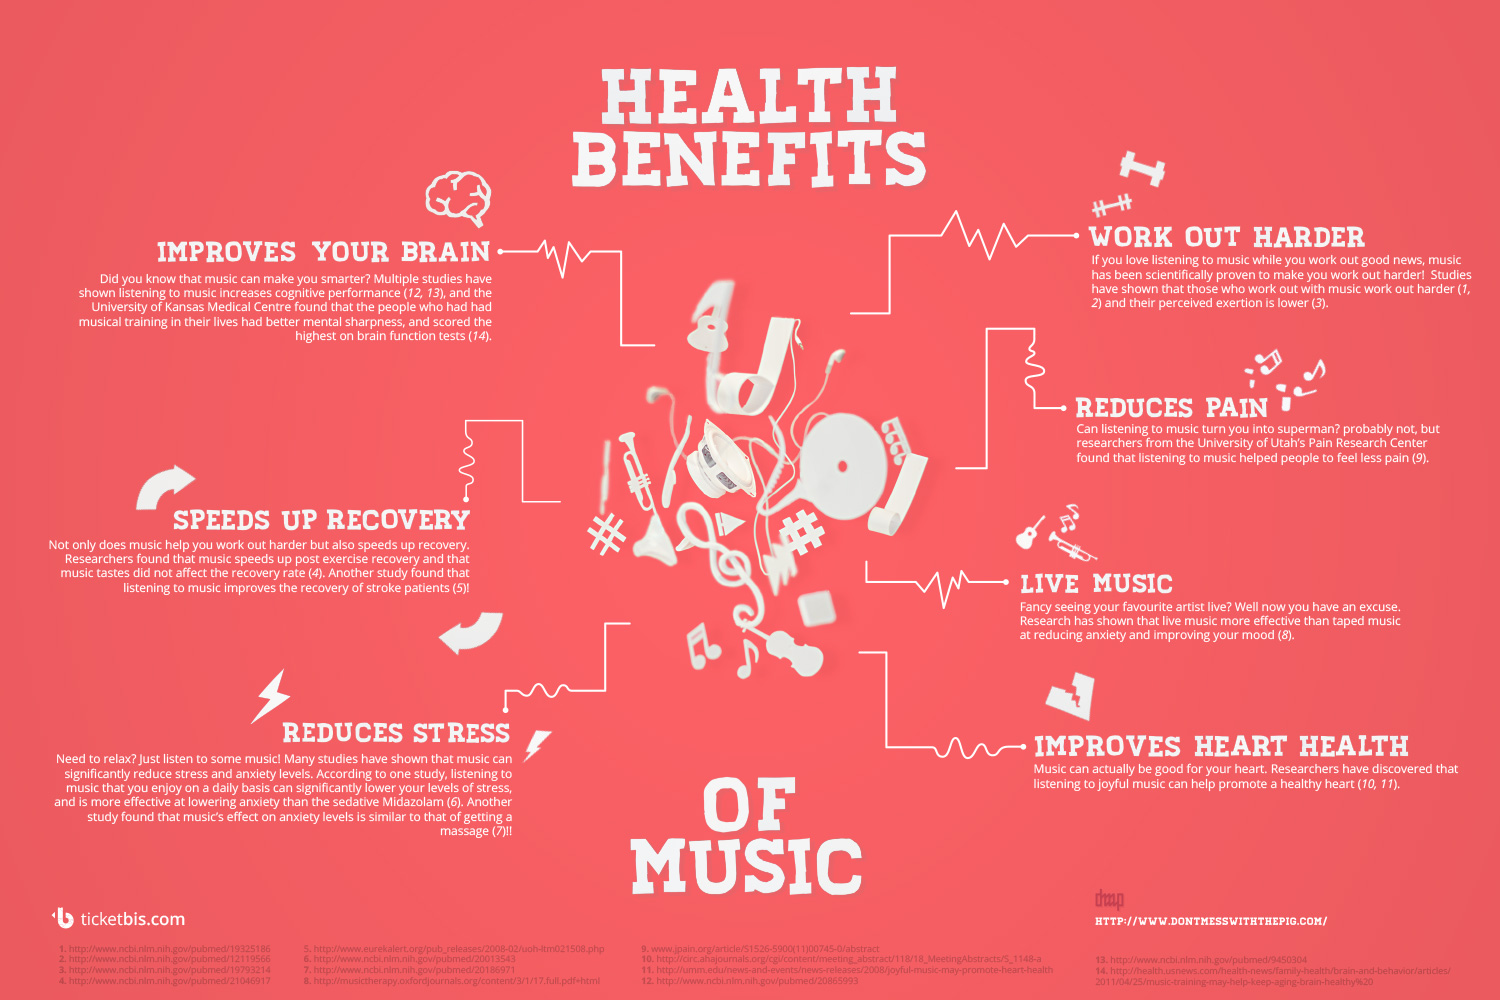 Comforting Sounds: Can music provide Health Benefits?